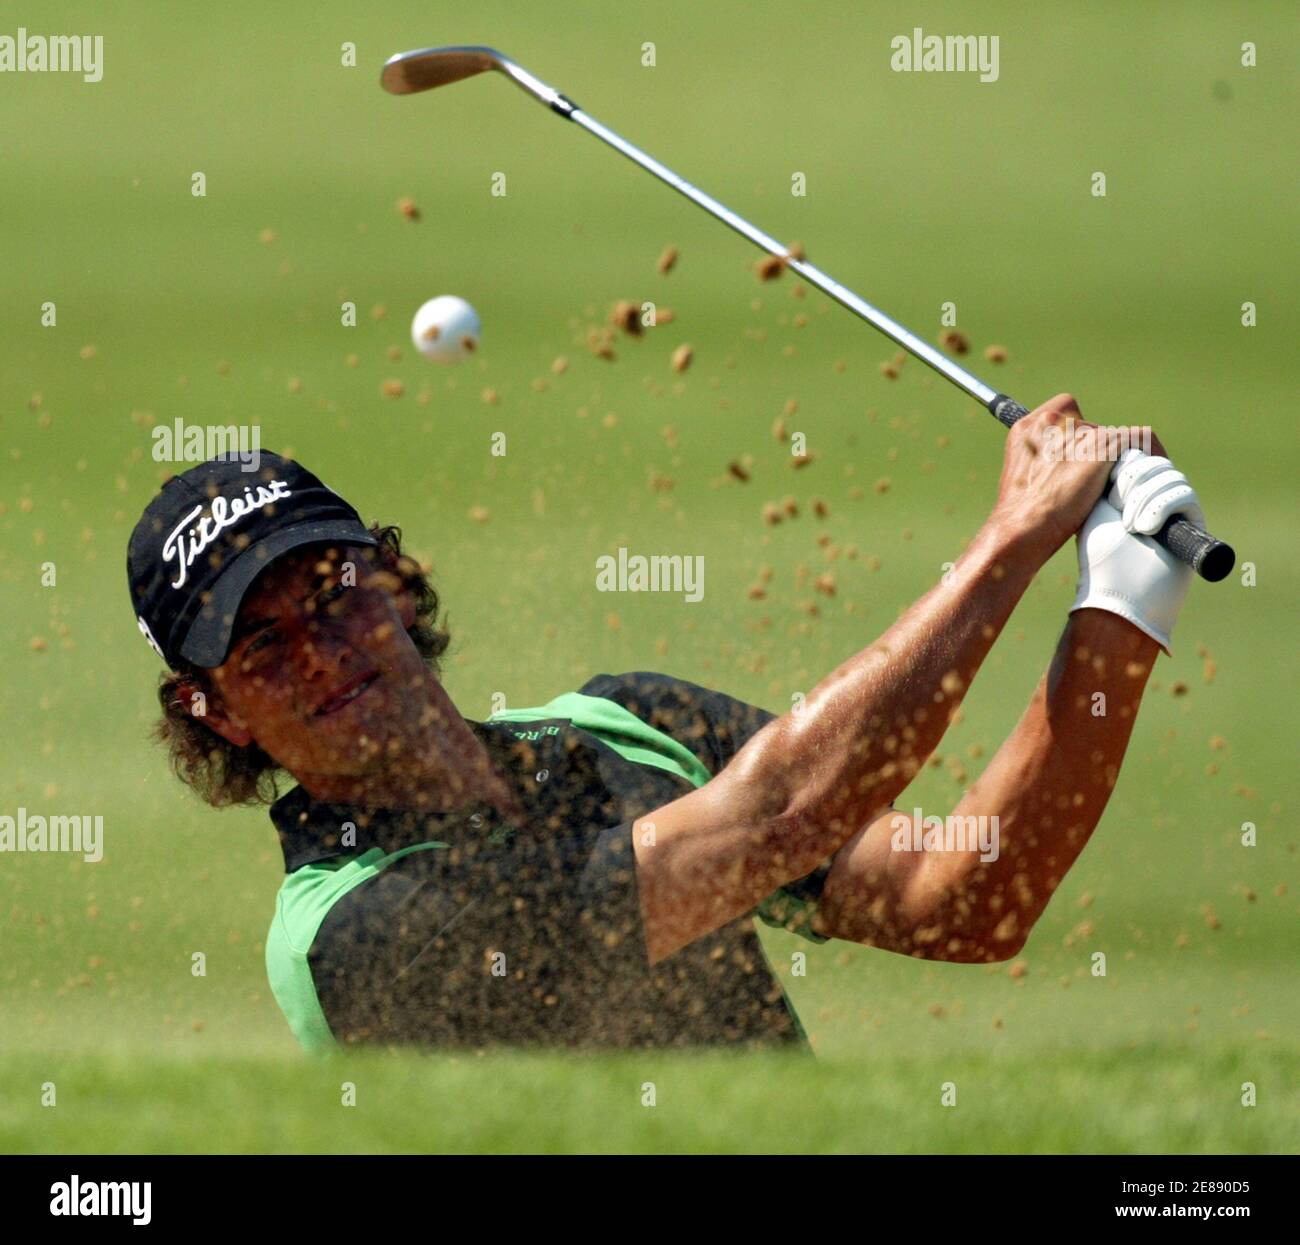 Australia's Adam Scott plays a shot at the 16th hole during the second round of the $4 million Sun City Golf Challenge in Sun City, west of Johannesburg, in South Africa December 2, 2005. Scott finished at three under-par. REUTERS/Juda Ngwenya Stock Photo